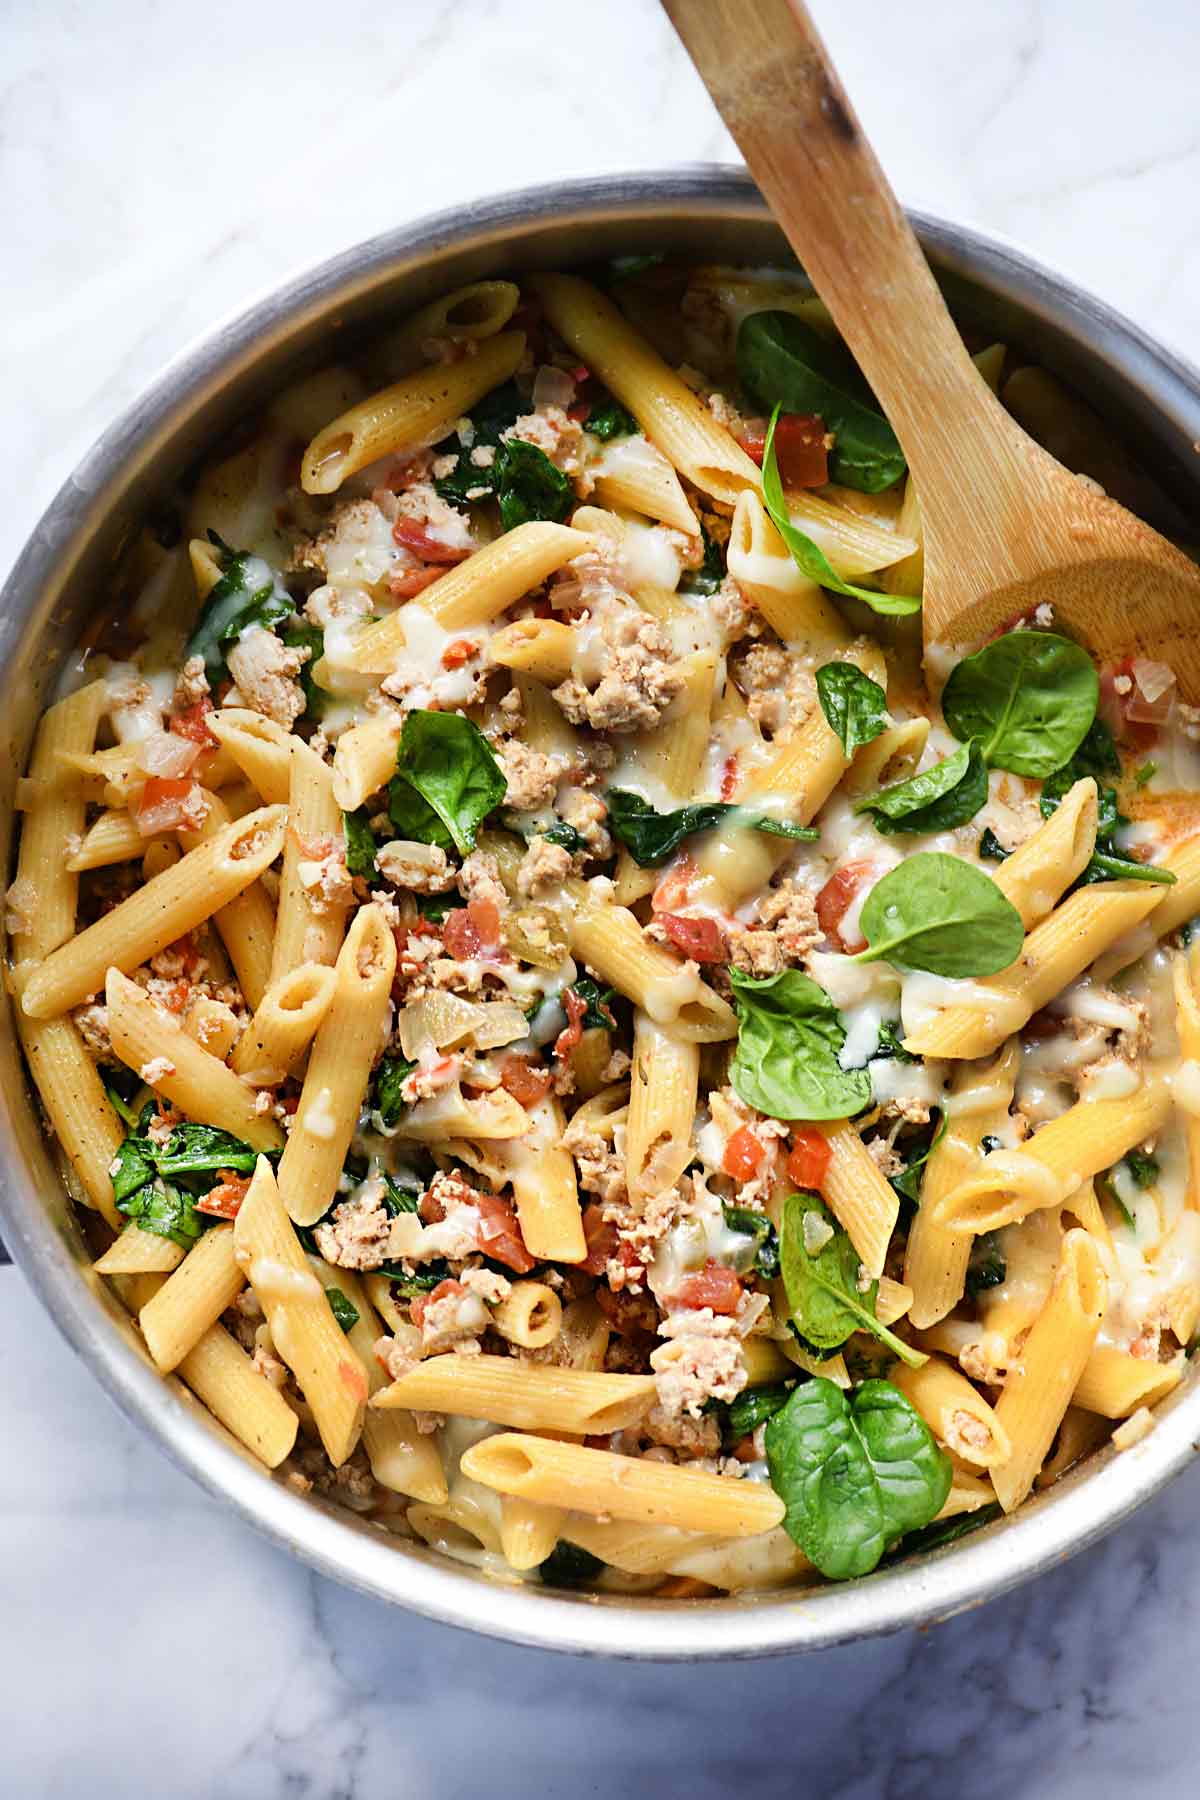 penne pasta with turkey and spinach from foodie crush